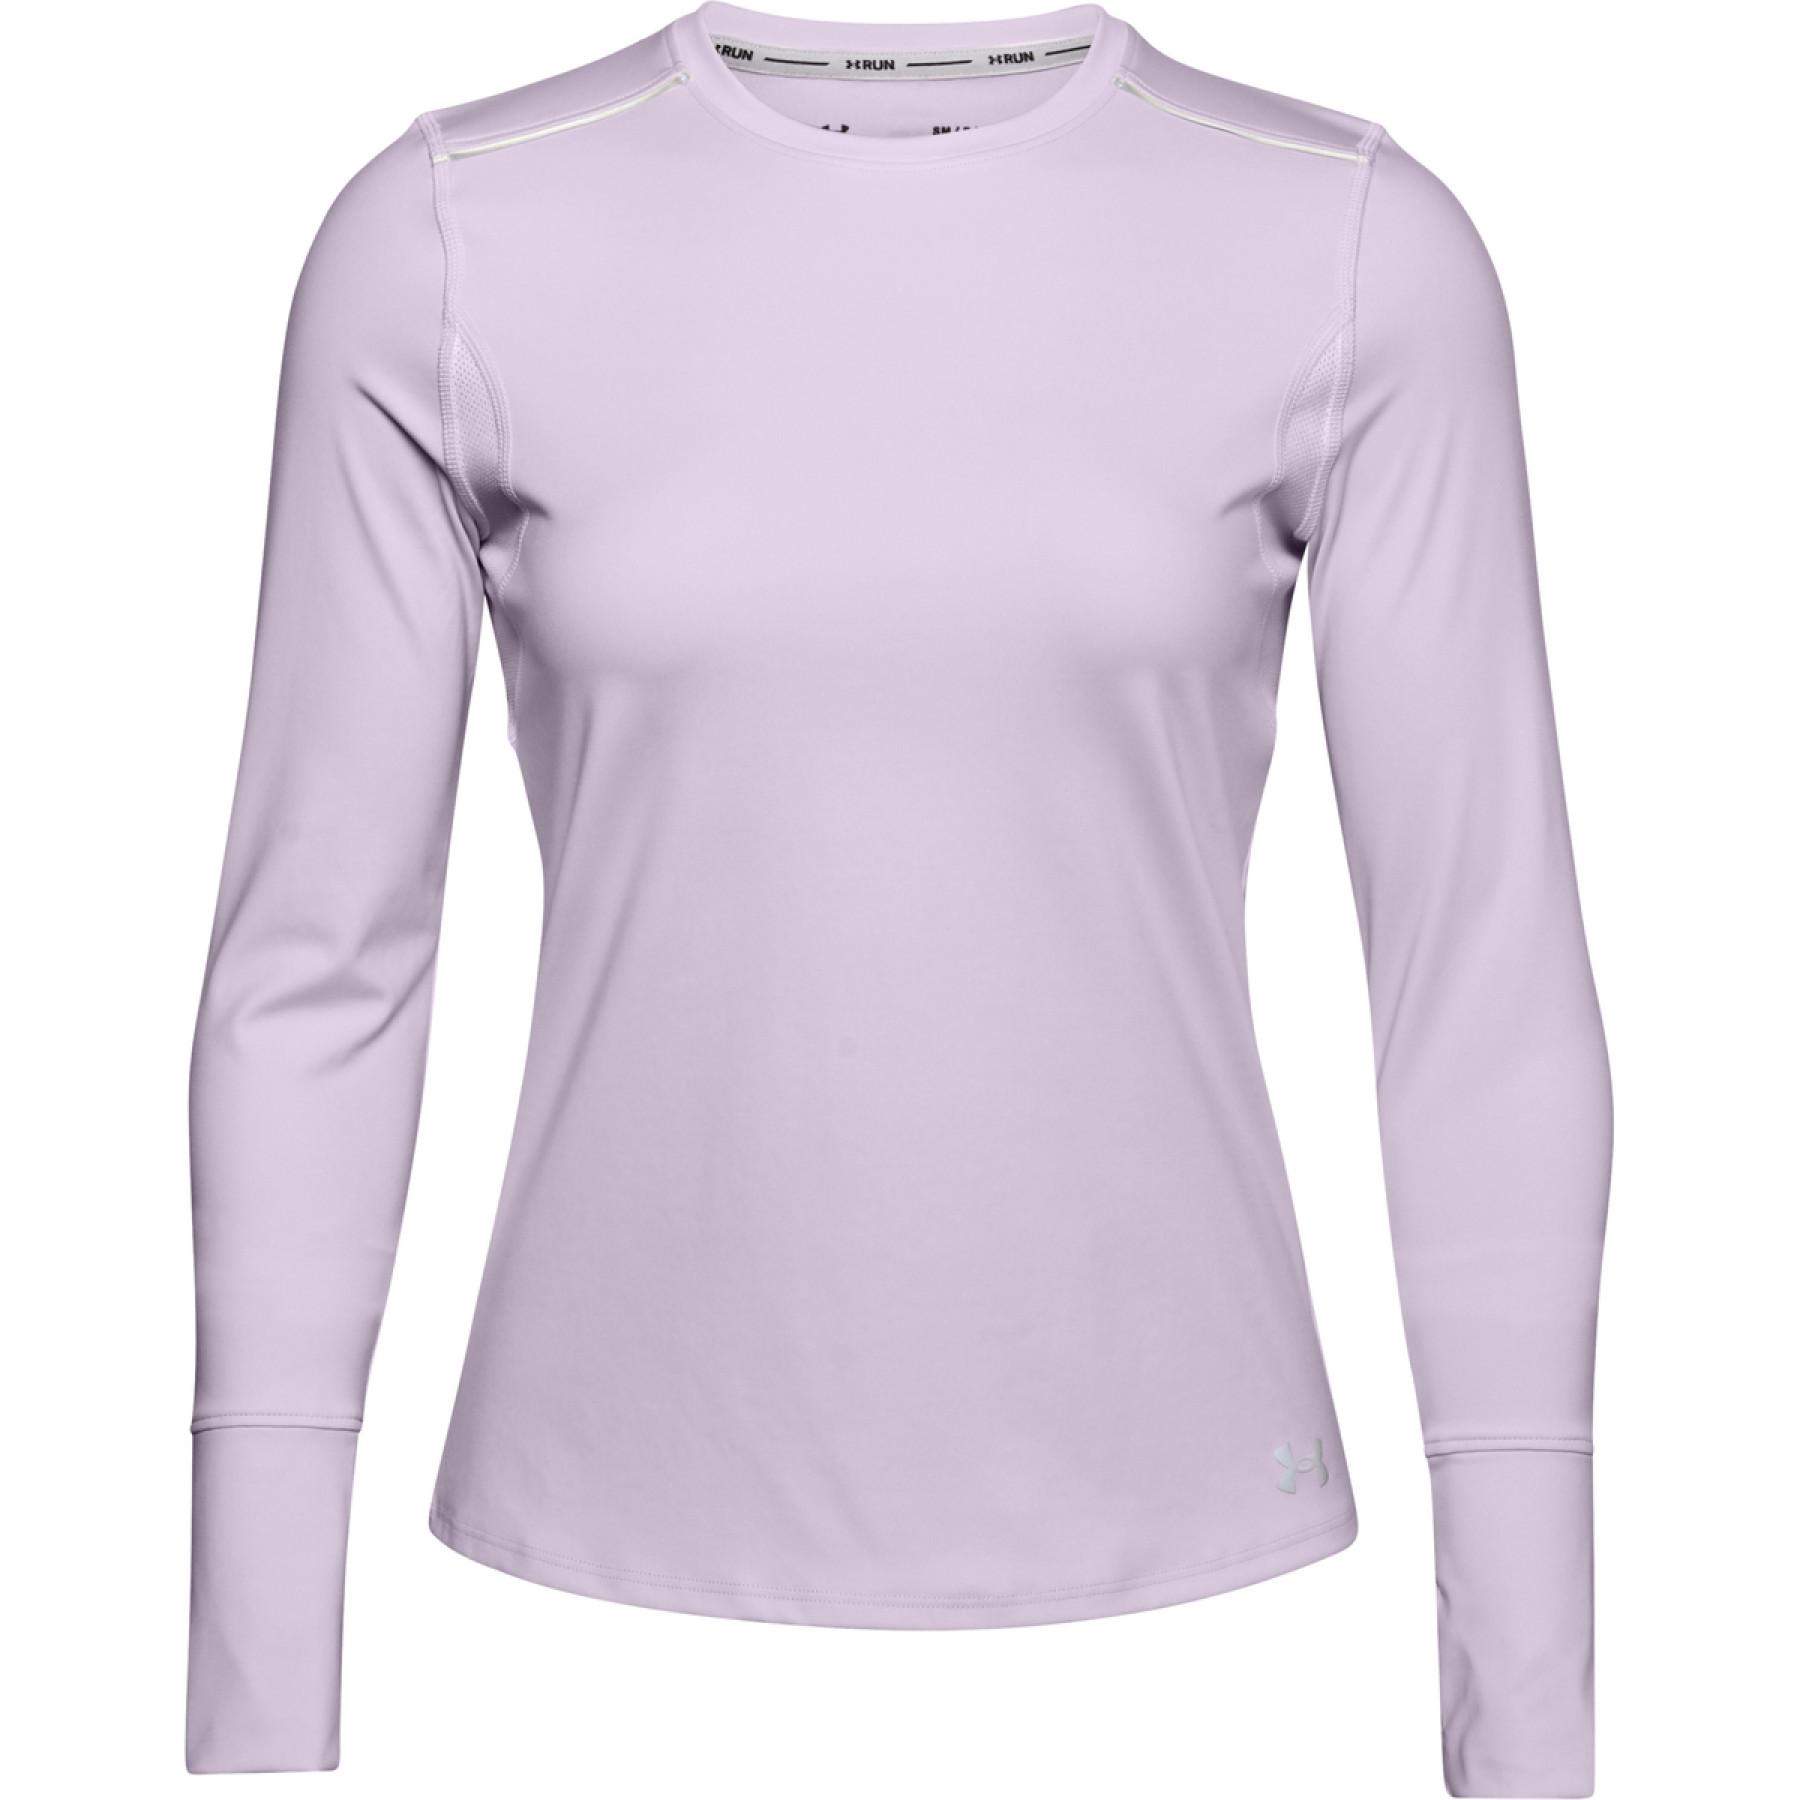 Maillot femme Under Armour à manches longues Empowered Crew